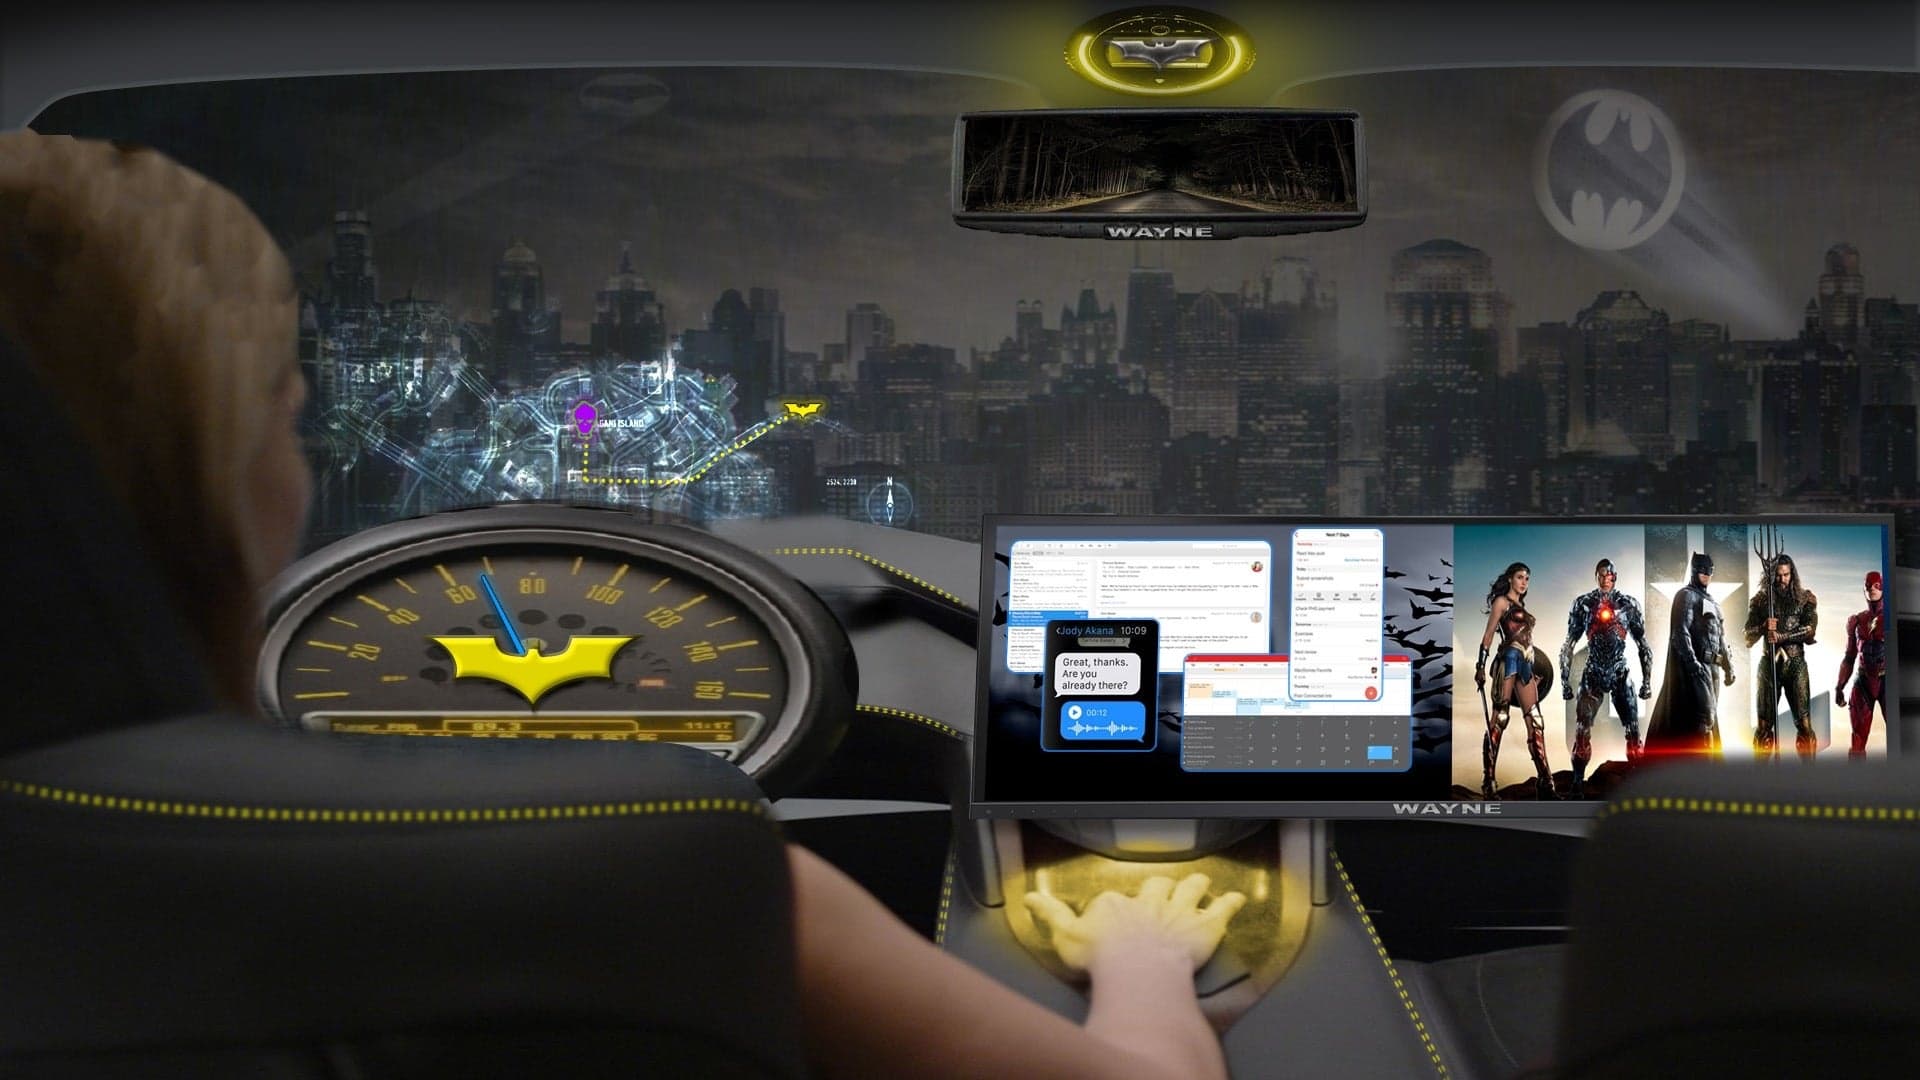 Intel and Warner Bros. Want to Beam Advertisements into Future Self-Driving Cars